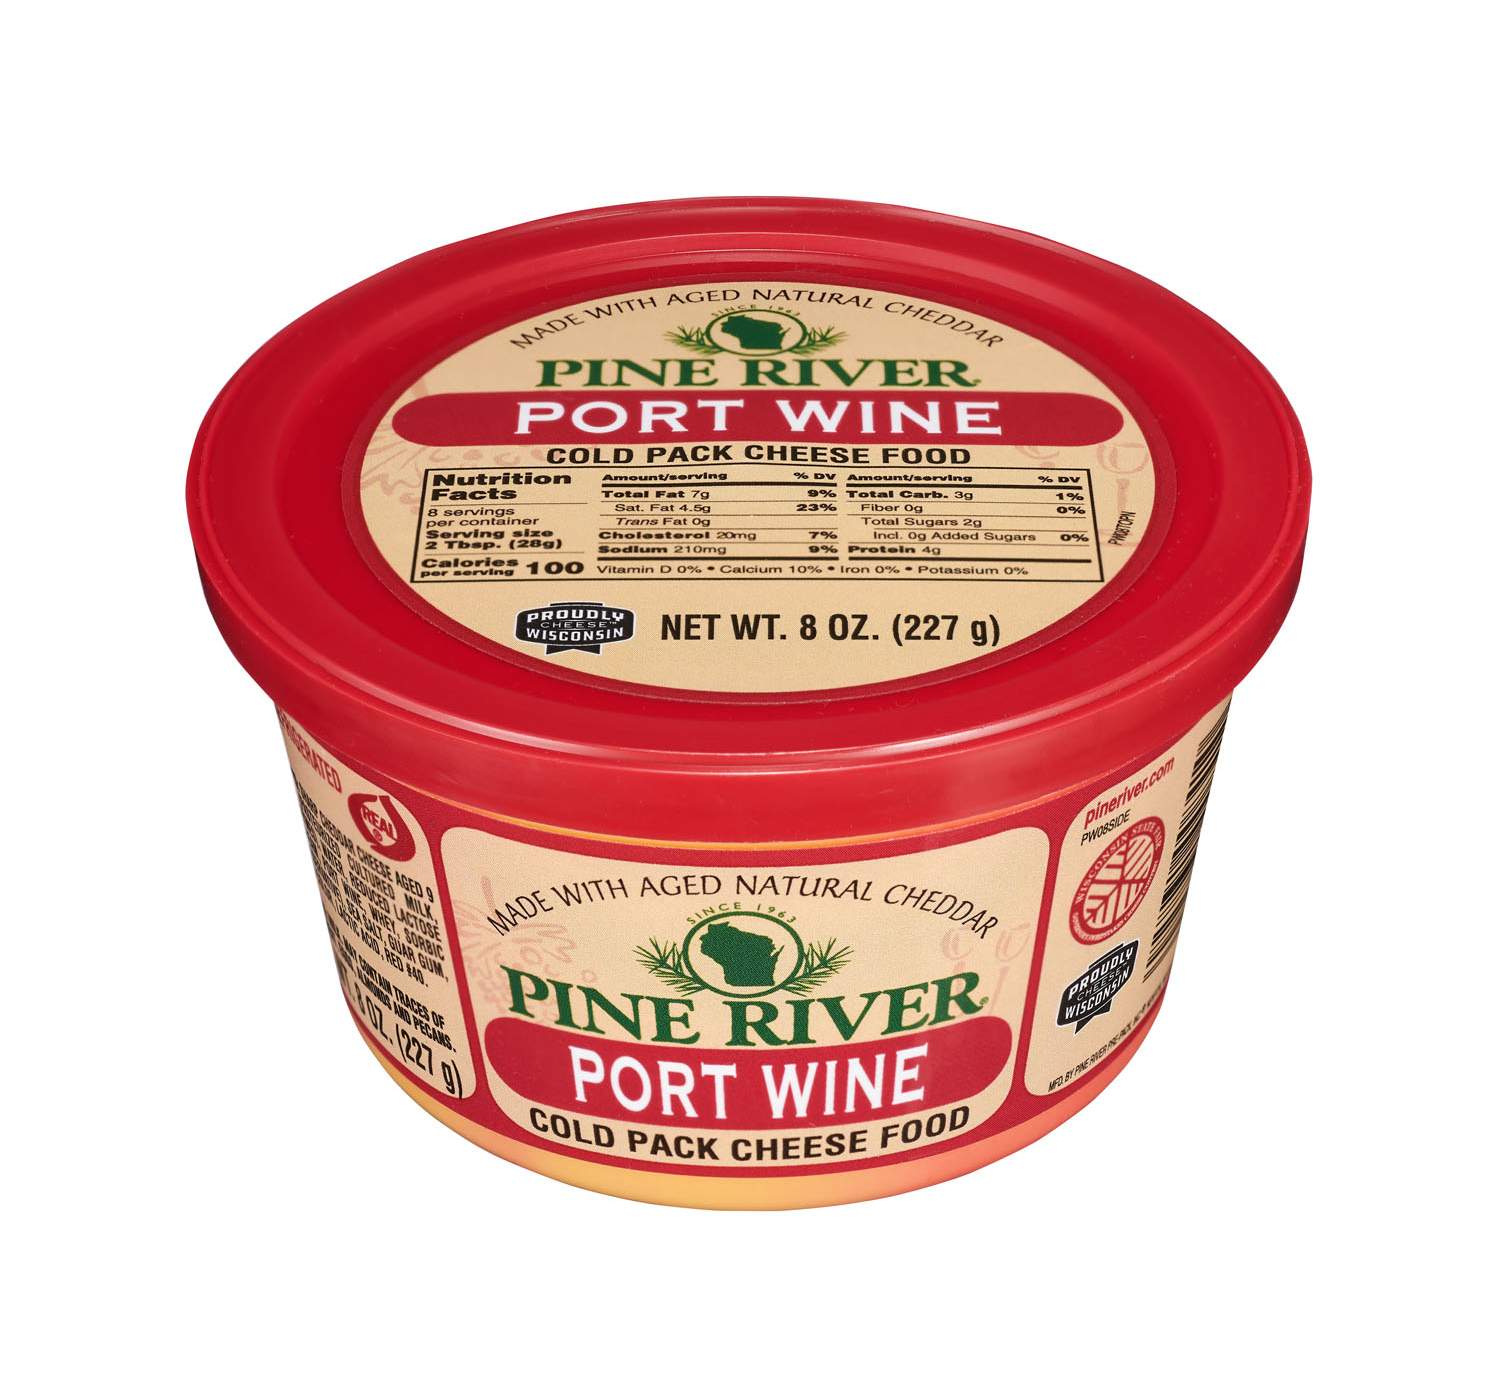 Pine River Port Wine Cheese Spread; image 3 of 3